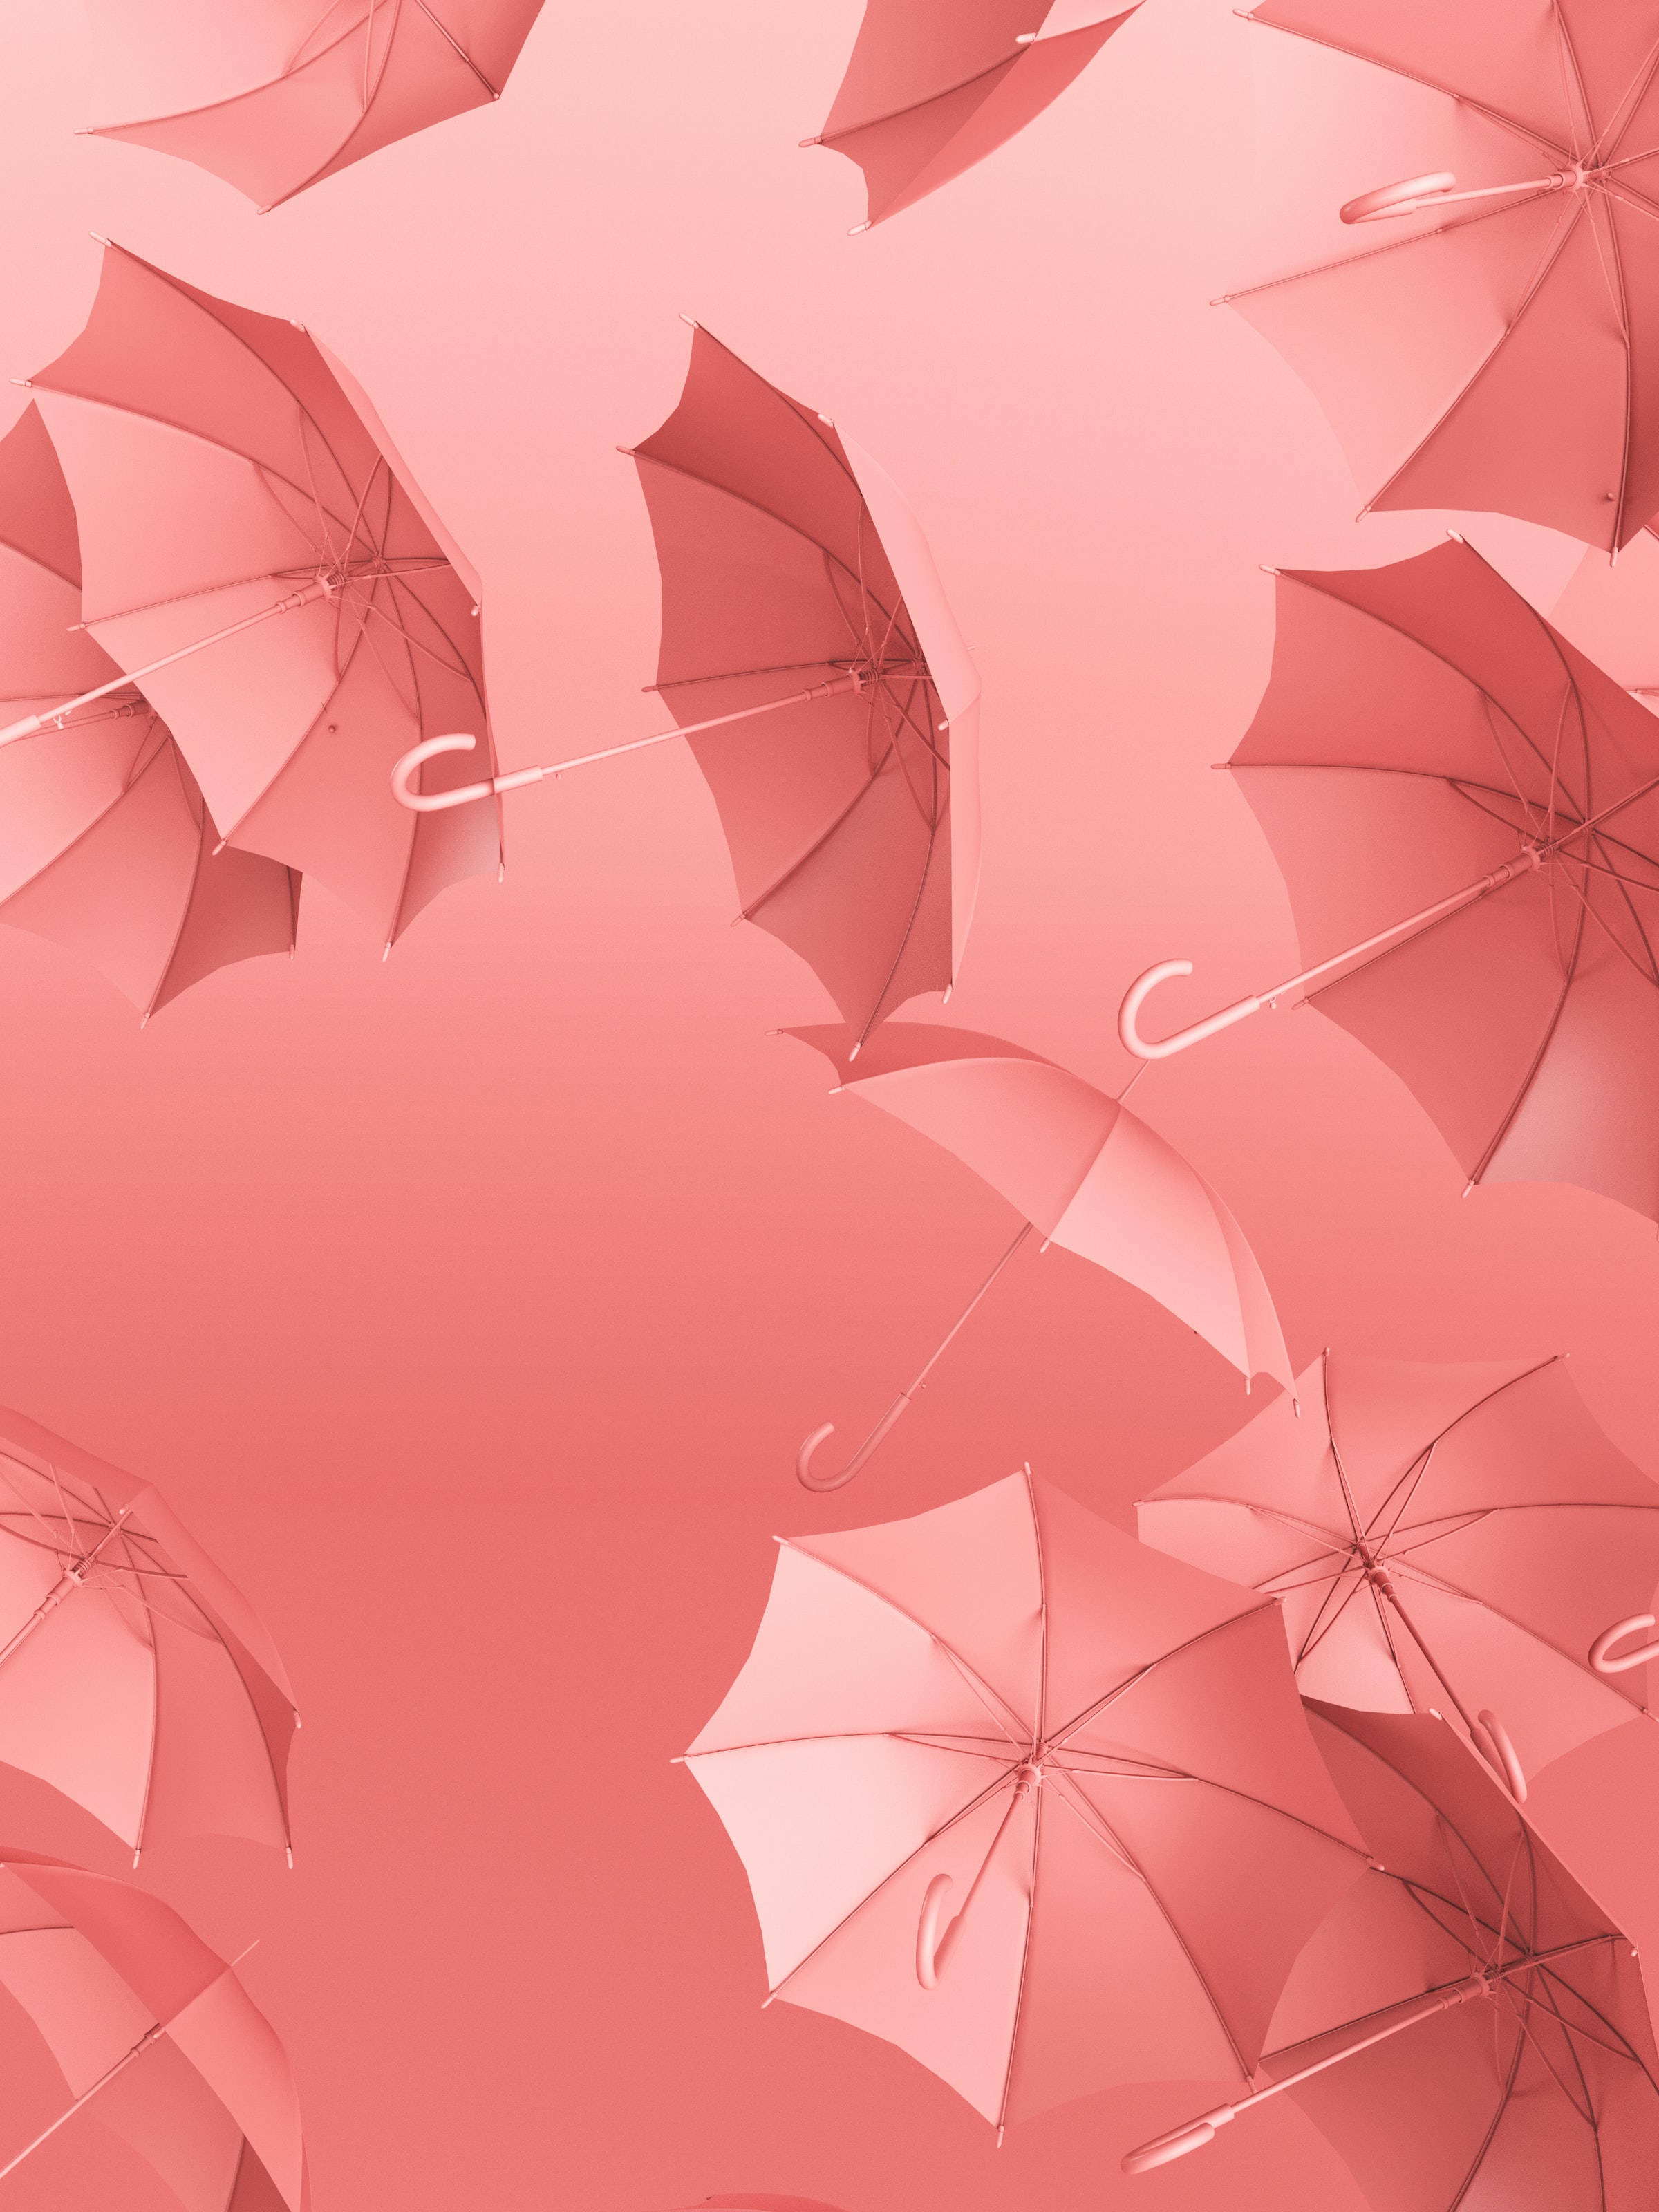 Cute Pink Aesthetic Floating Umbrellas Picture